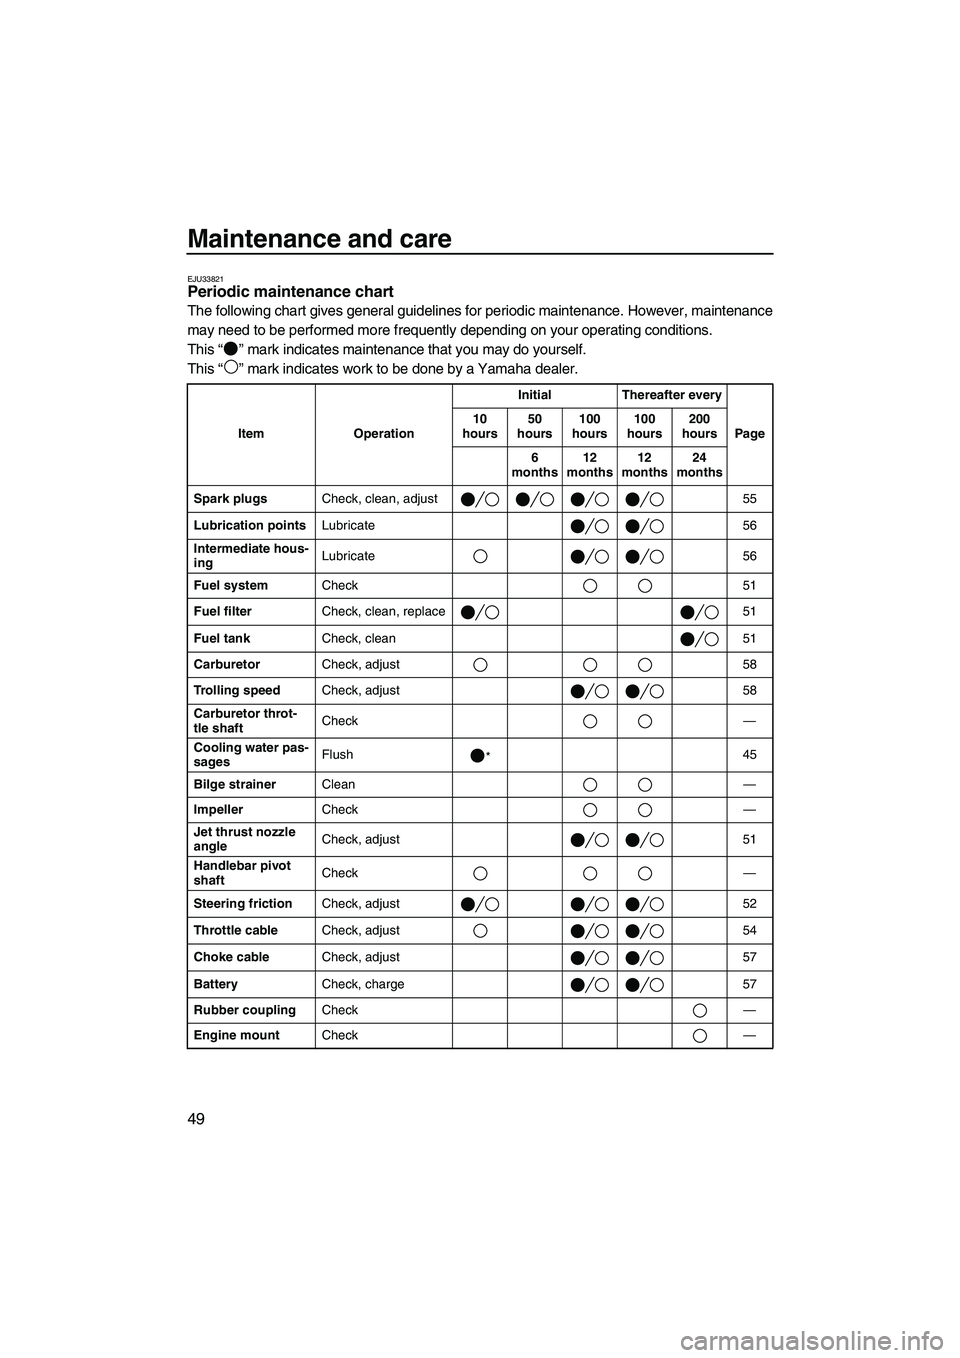 YAMAHA SUPERJET 2009 User Guide Maintenance and care
49
EJU33821Periodic maintenance chart 
The following chart gives general guidelines for periodic maintenance. However, maintenance
may need to be performed more frequently dependi